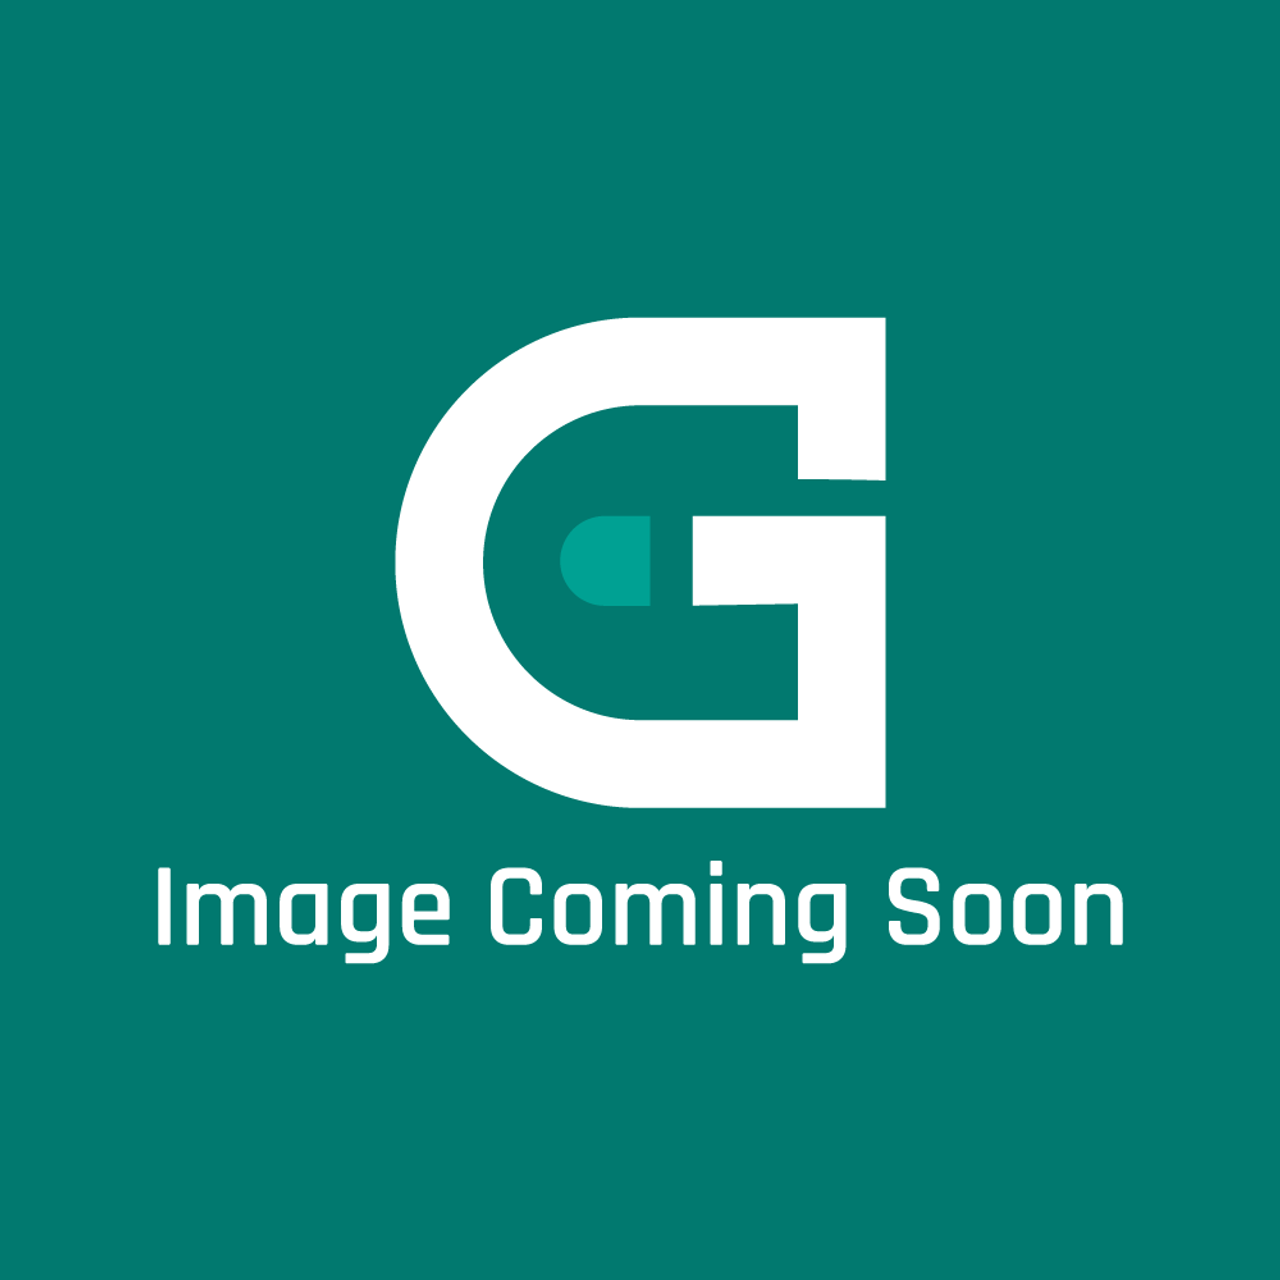 AGA Marvel JPAD230788 - Insulation Pad S/Oven Ec3 Lm - Image Coming Soon!